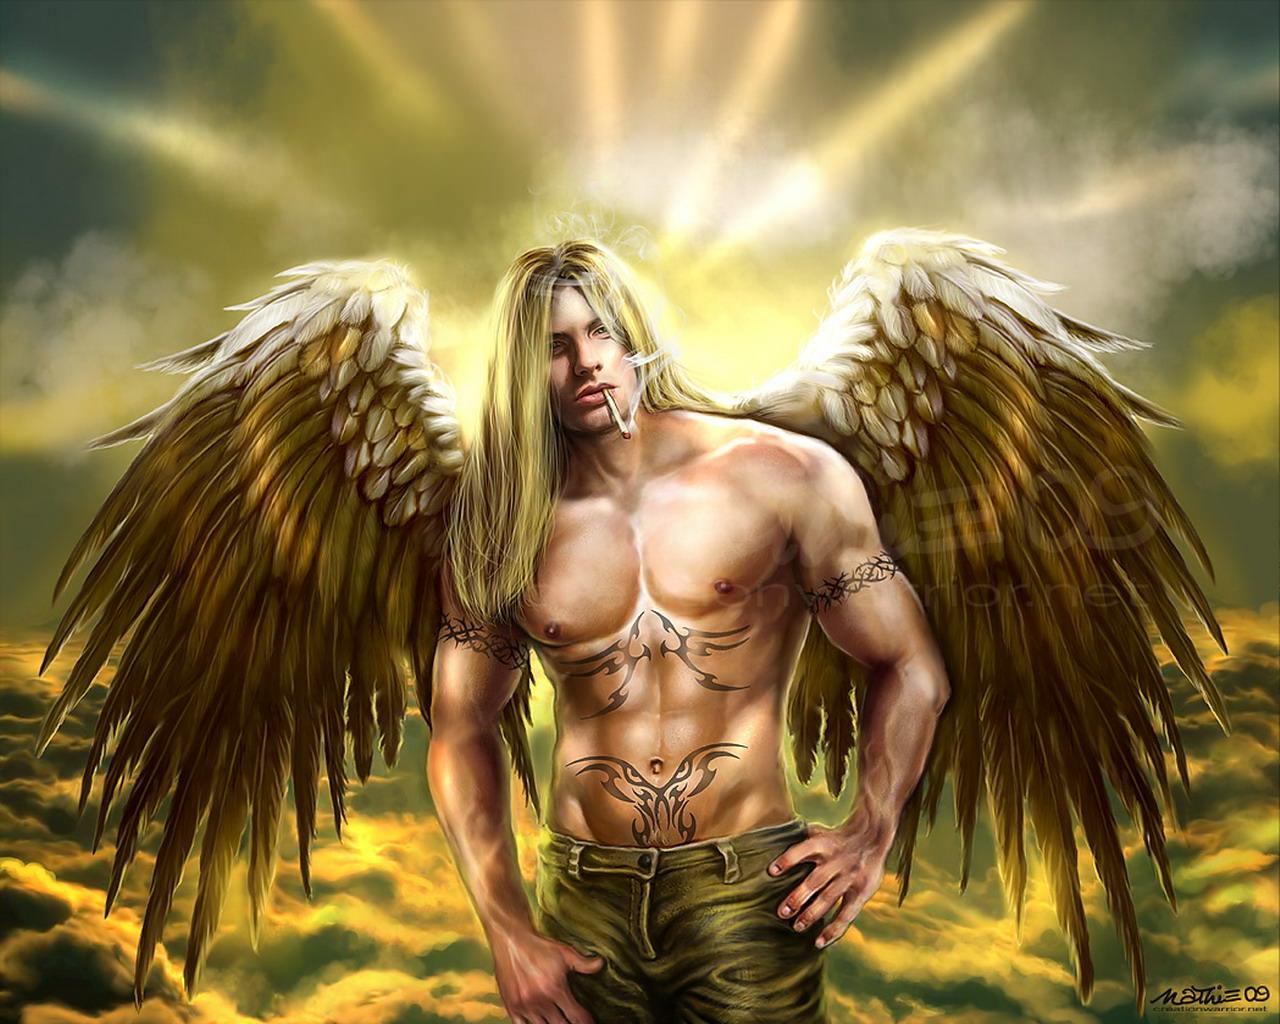 Smoking Blonde Boy Angel wallpapers from Angels wallpapers.